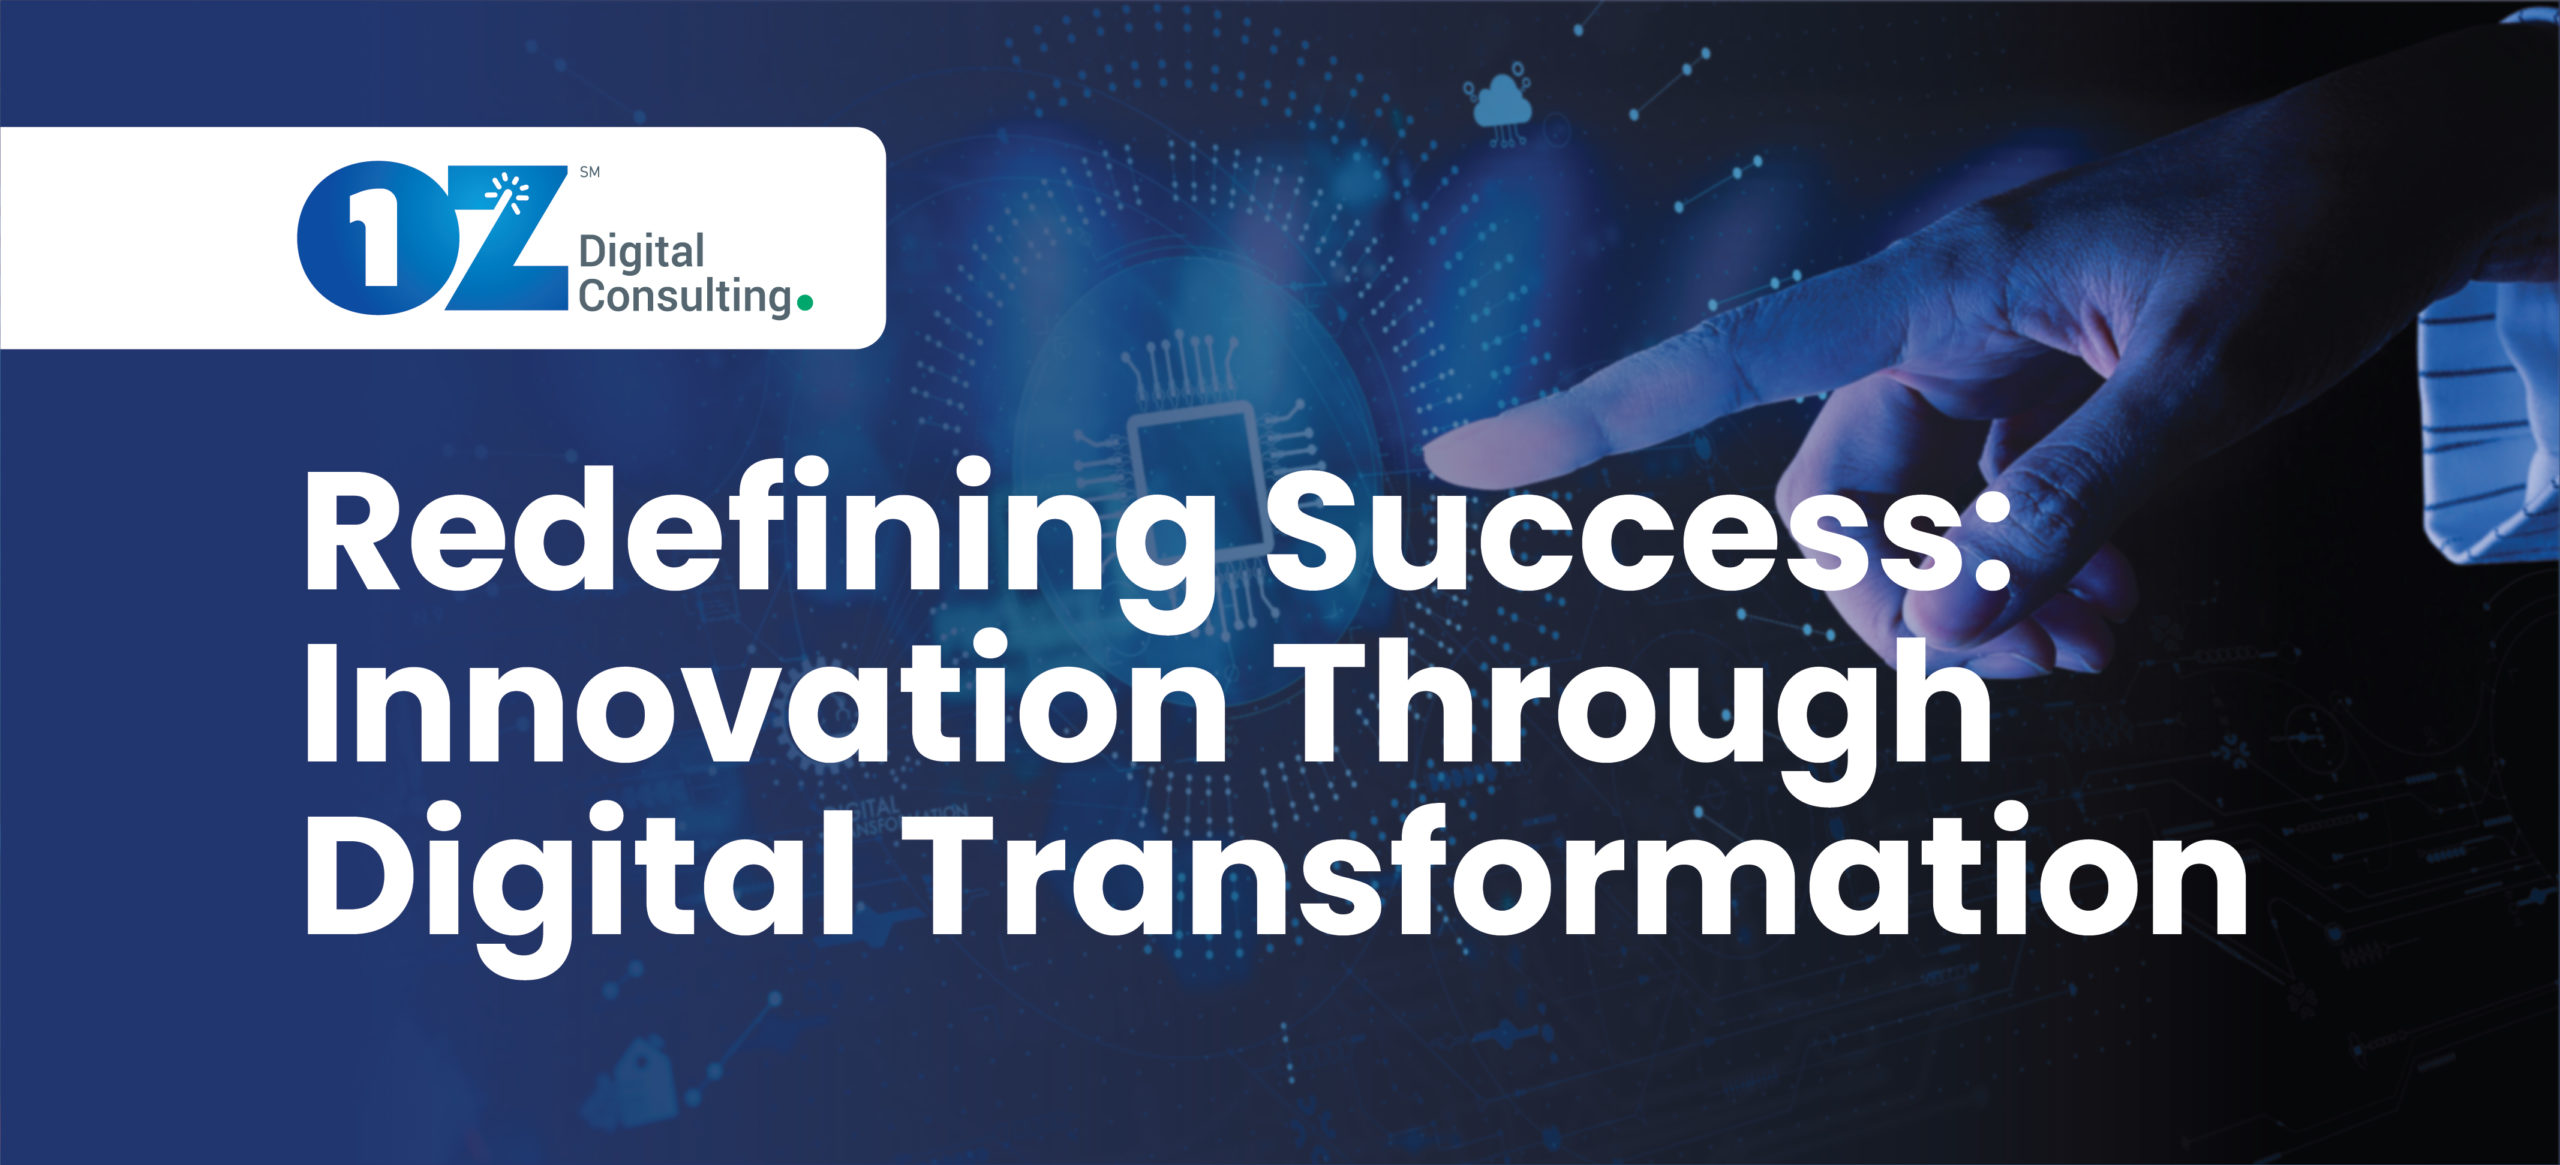 Oz Digital Consulting Redefining Success Innovation - Blog cover-01